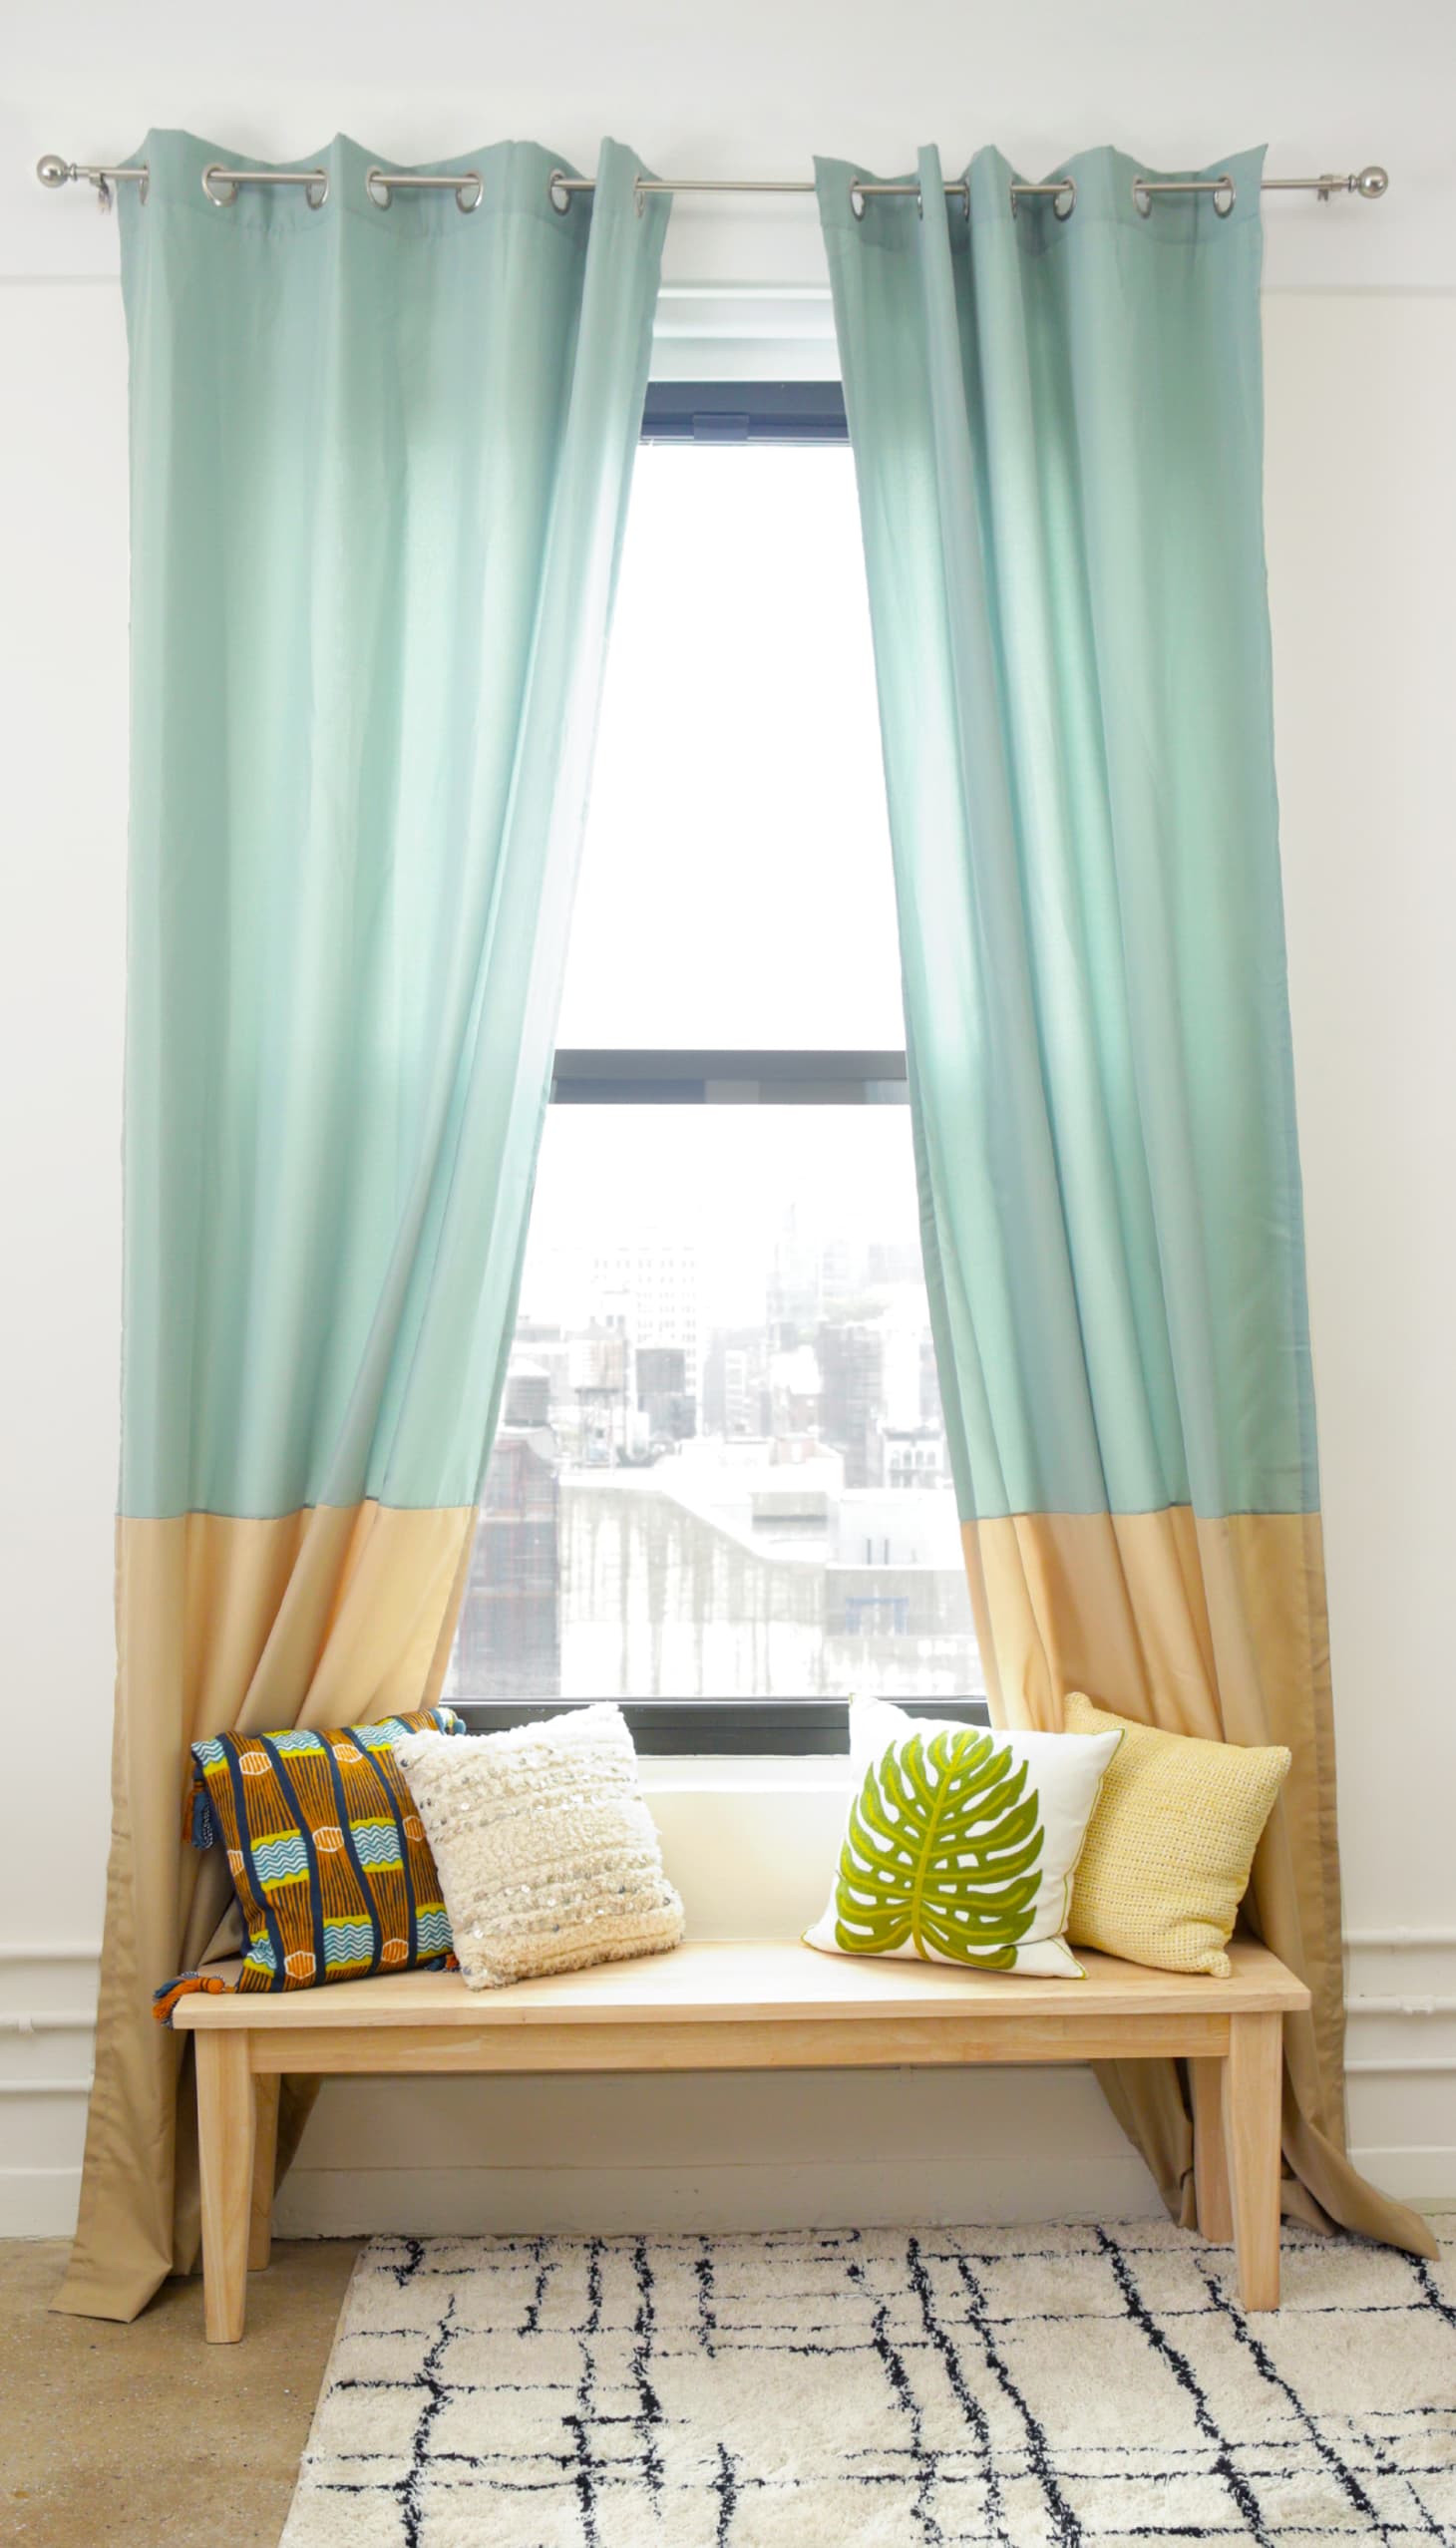 How to Hang Curtains - Do's and Don'ts | Apartment Therapy